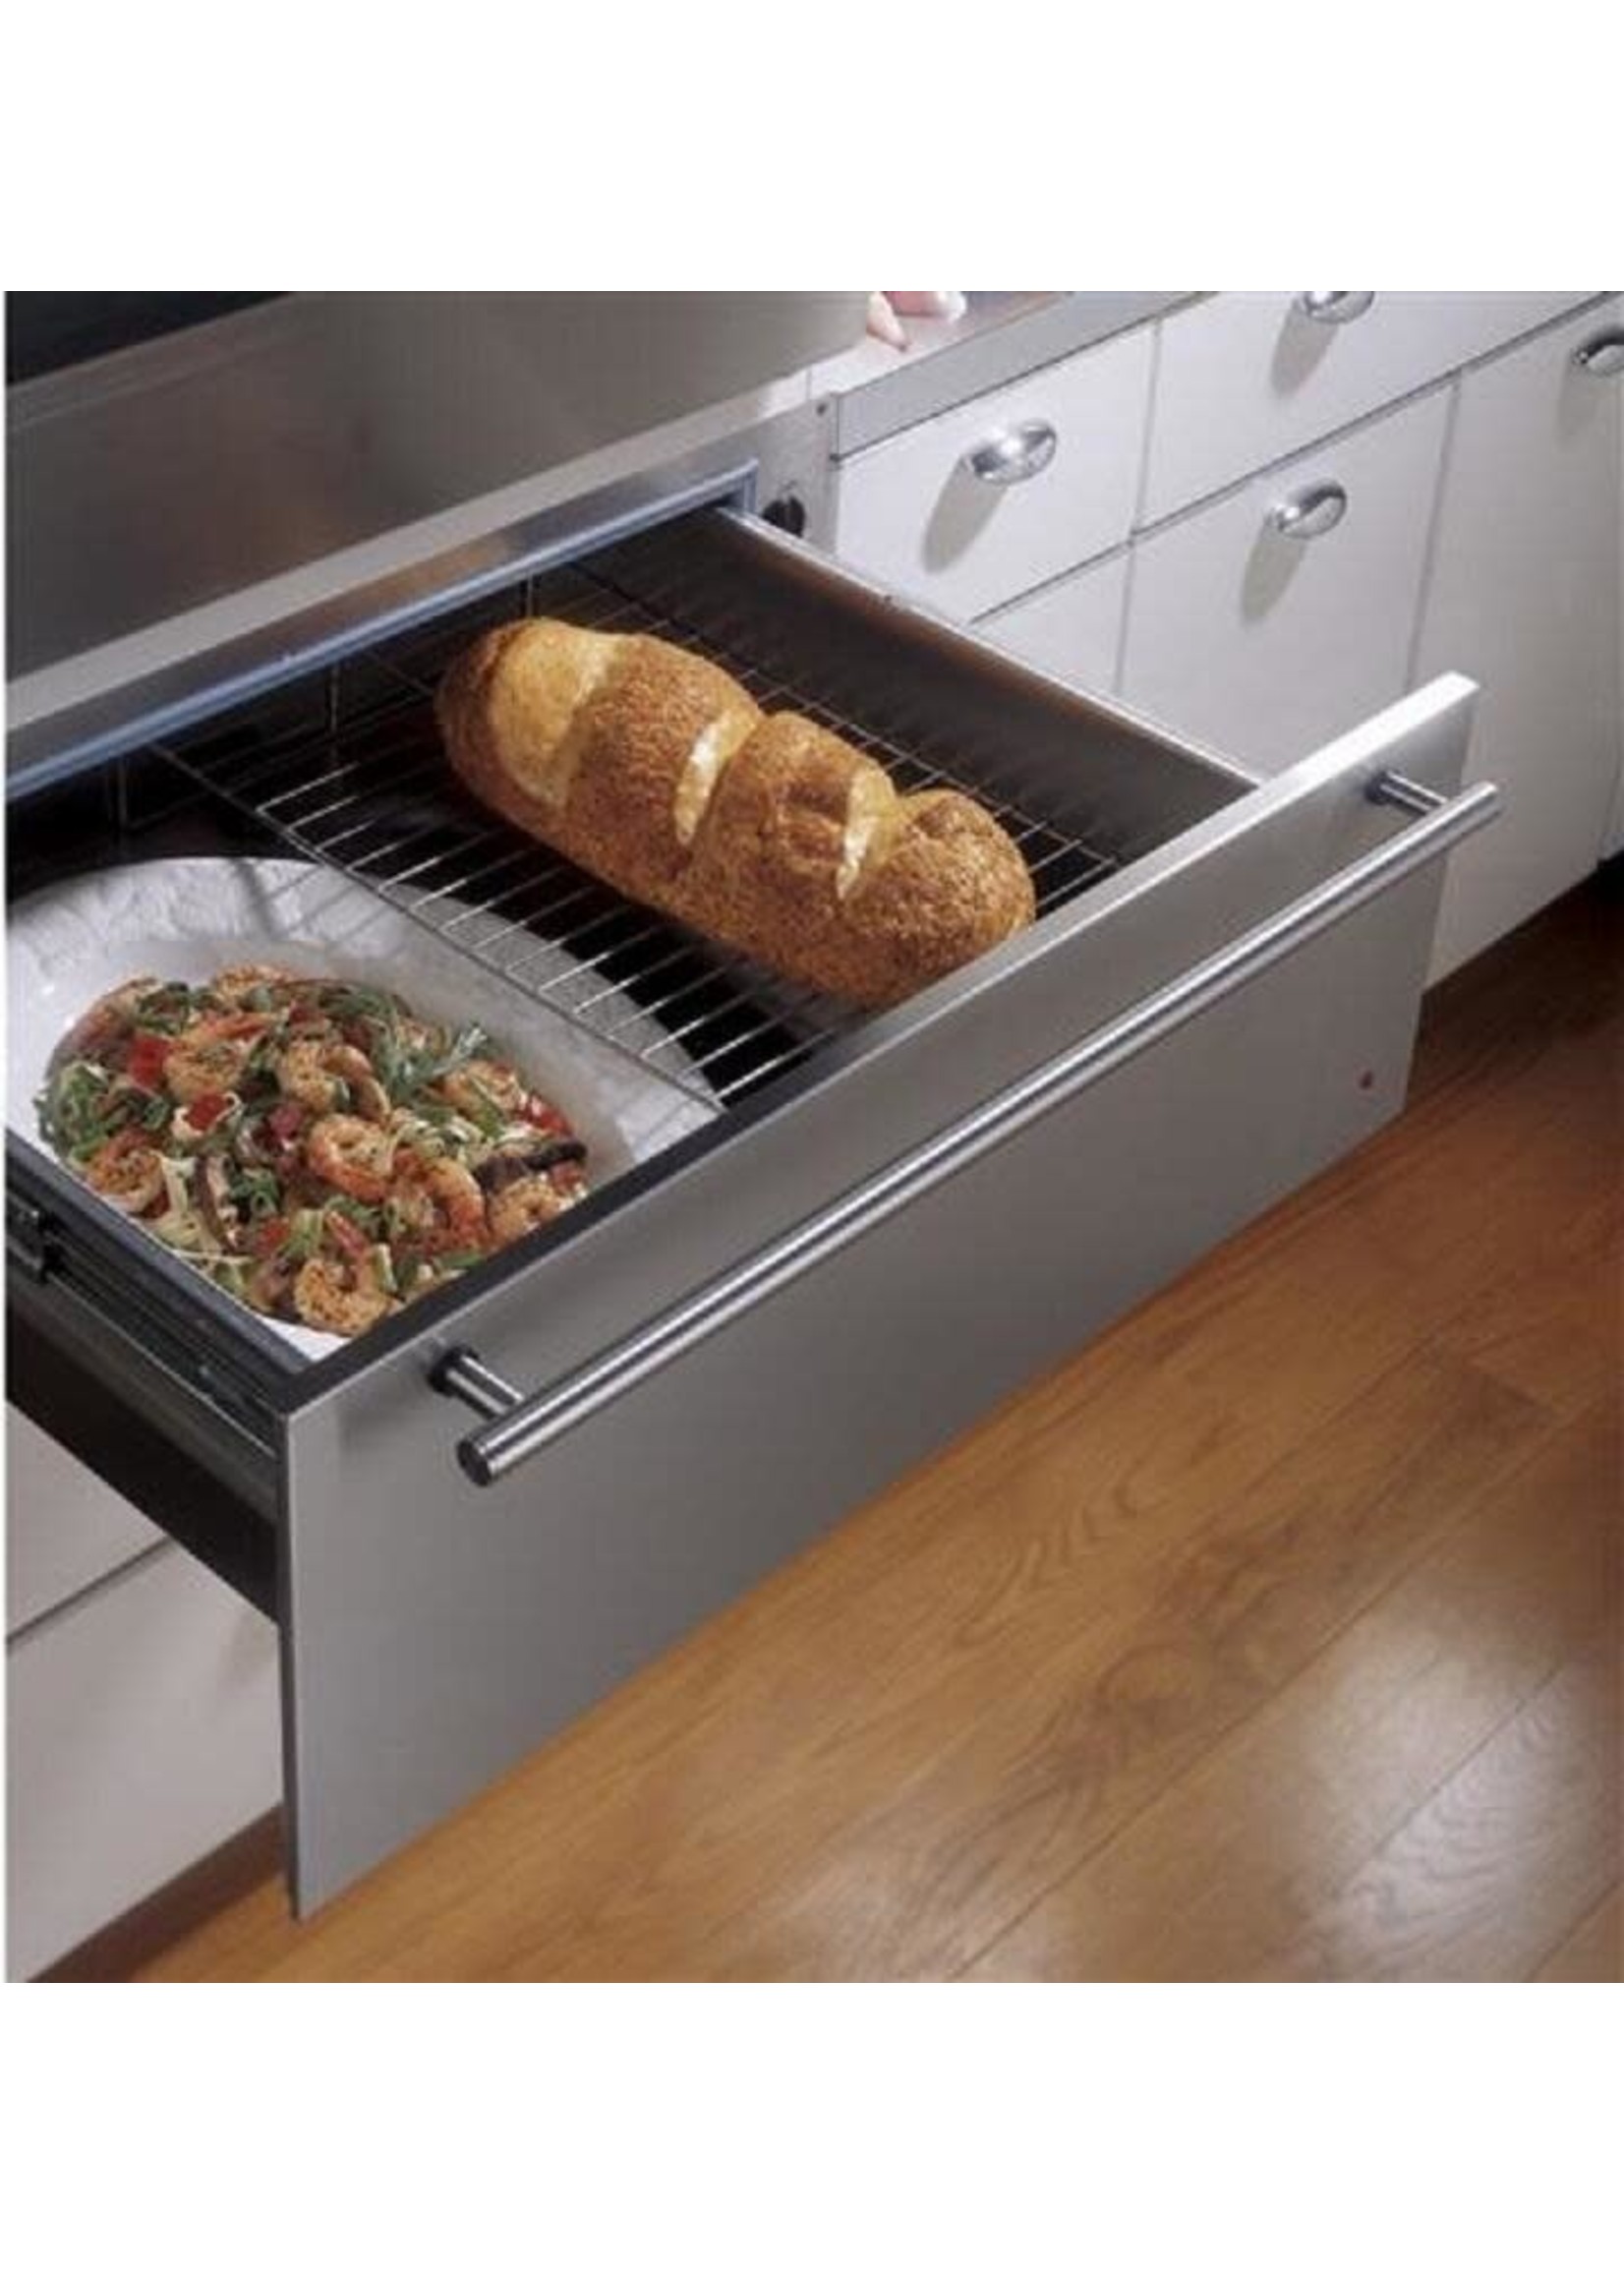 Monogram ZJ7000SJSS 27" Warming Drawer with 1.67 cu. ft. Capacity, Infinite Setting Temperature Control, Hidden Controls and Variable Humidity Control, in Stainless Steel